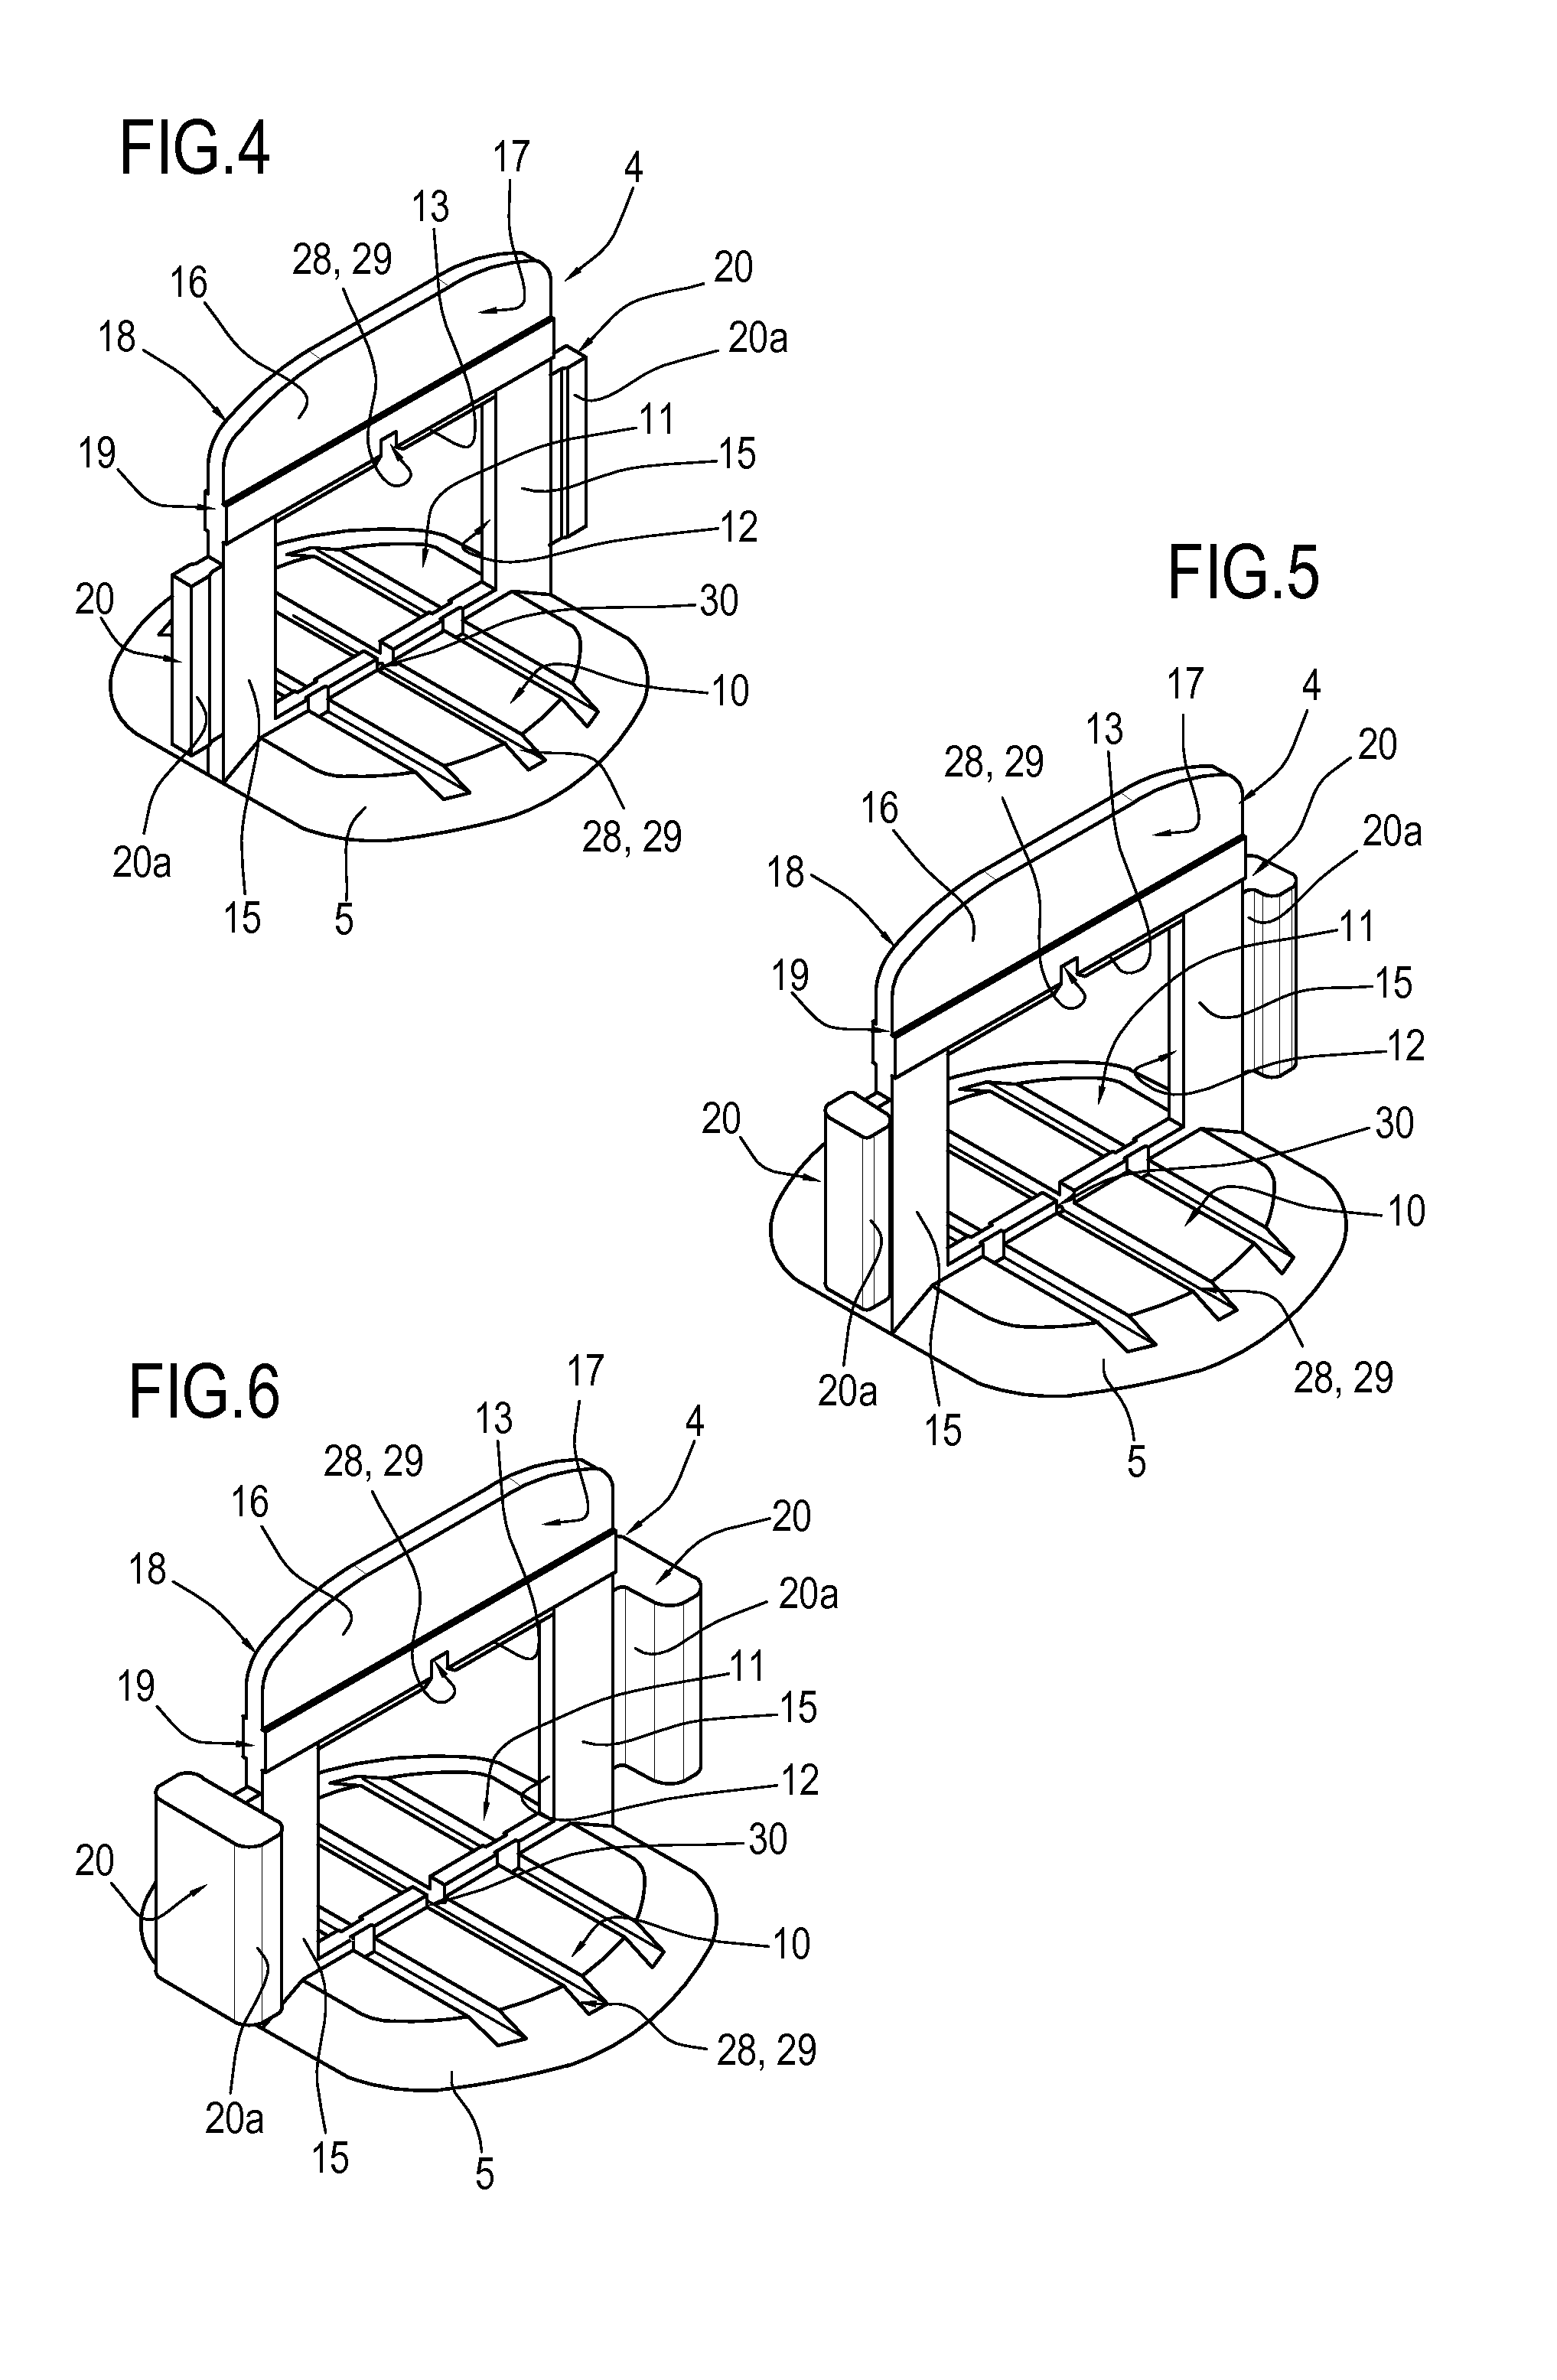 Leveling and aligning device for installing tiles